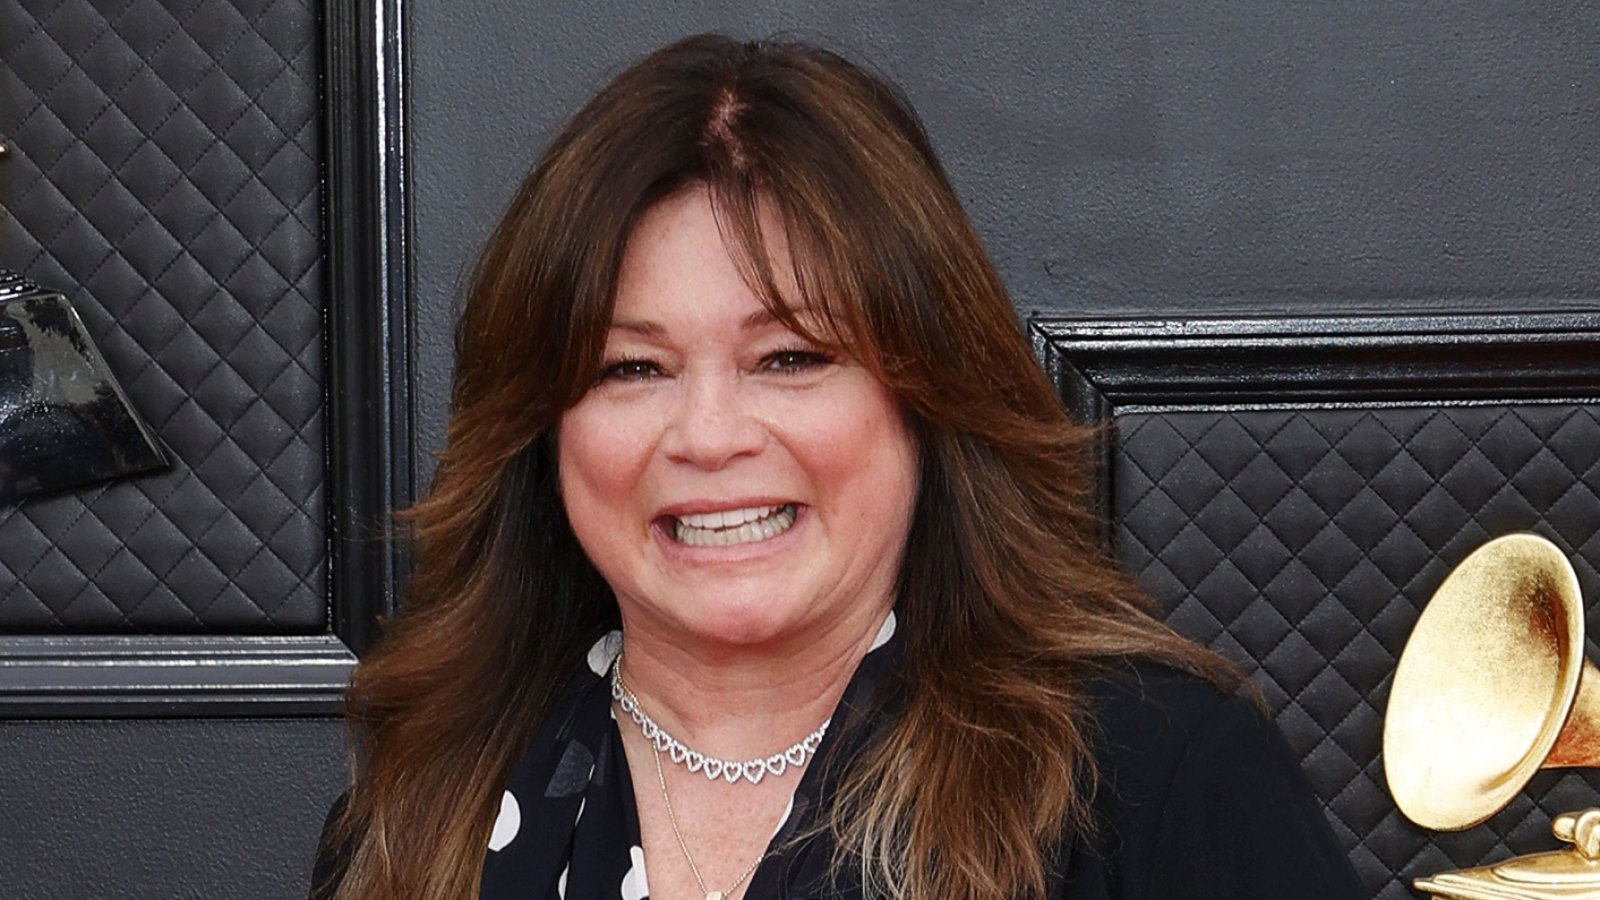 Valerie Bertinelli Is Thankful for Family's 'Support' on 1st Christmas Since Her Divorce From Tom Vitale- 'Spending Time With the People Who Matter Most' - 322 Arrivals - 64th Annual Grammy Awards, Las Vegas, USA - 03 Apr 2022